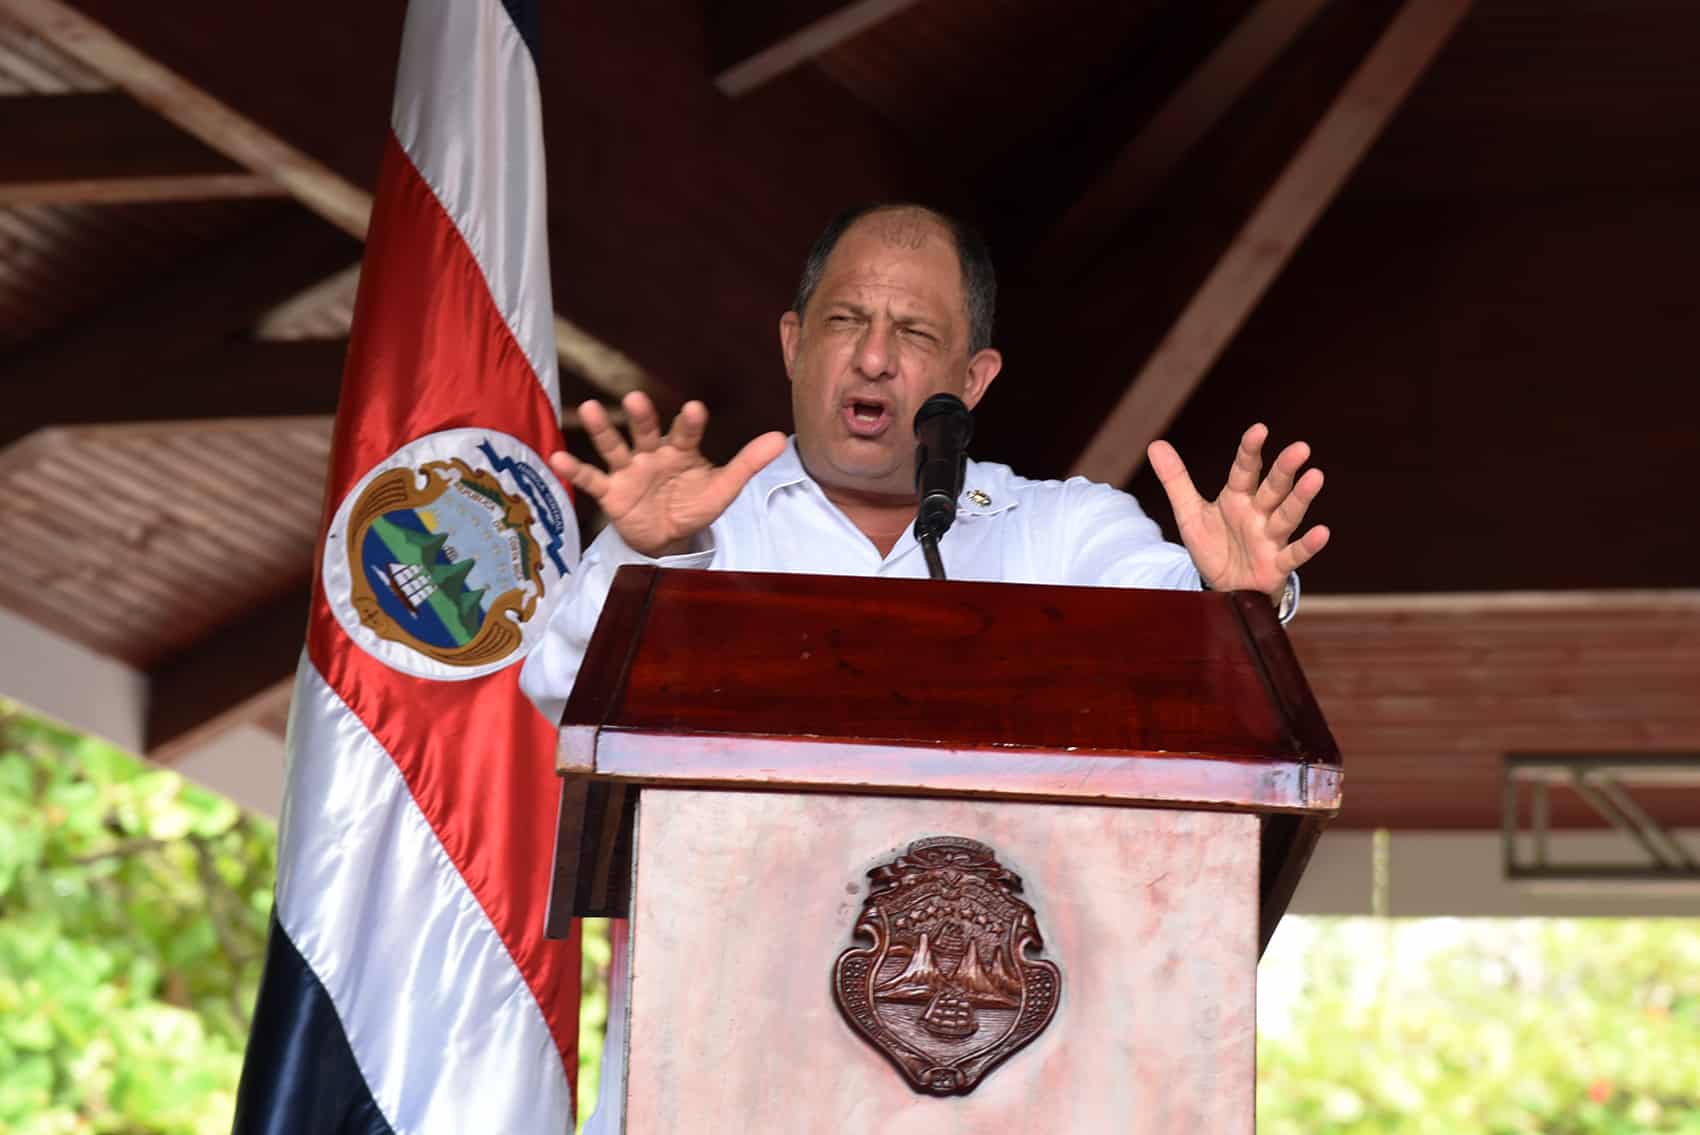 President Luis Guillermo Solís took the stage on Saturday to deliver a speech under the blistering Guanacaste sun.